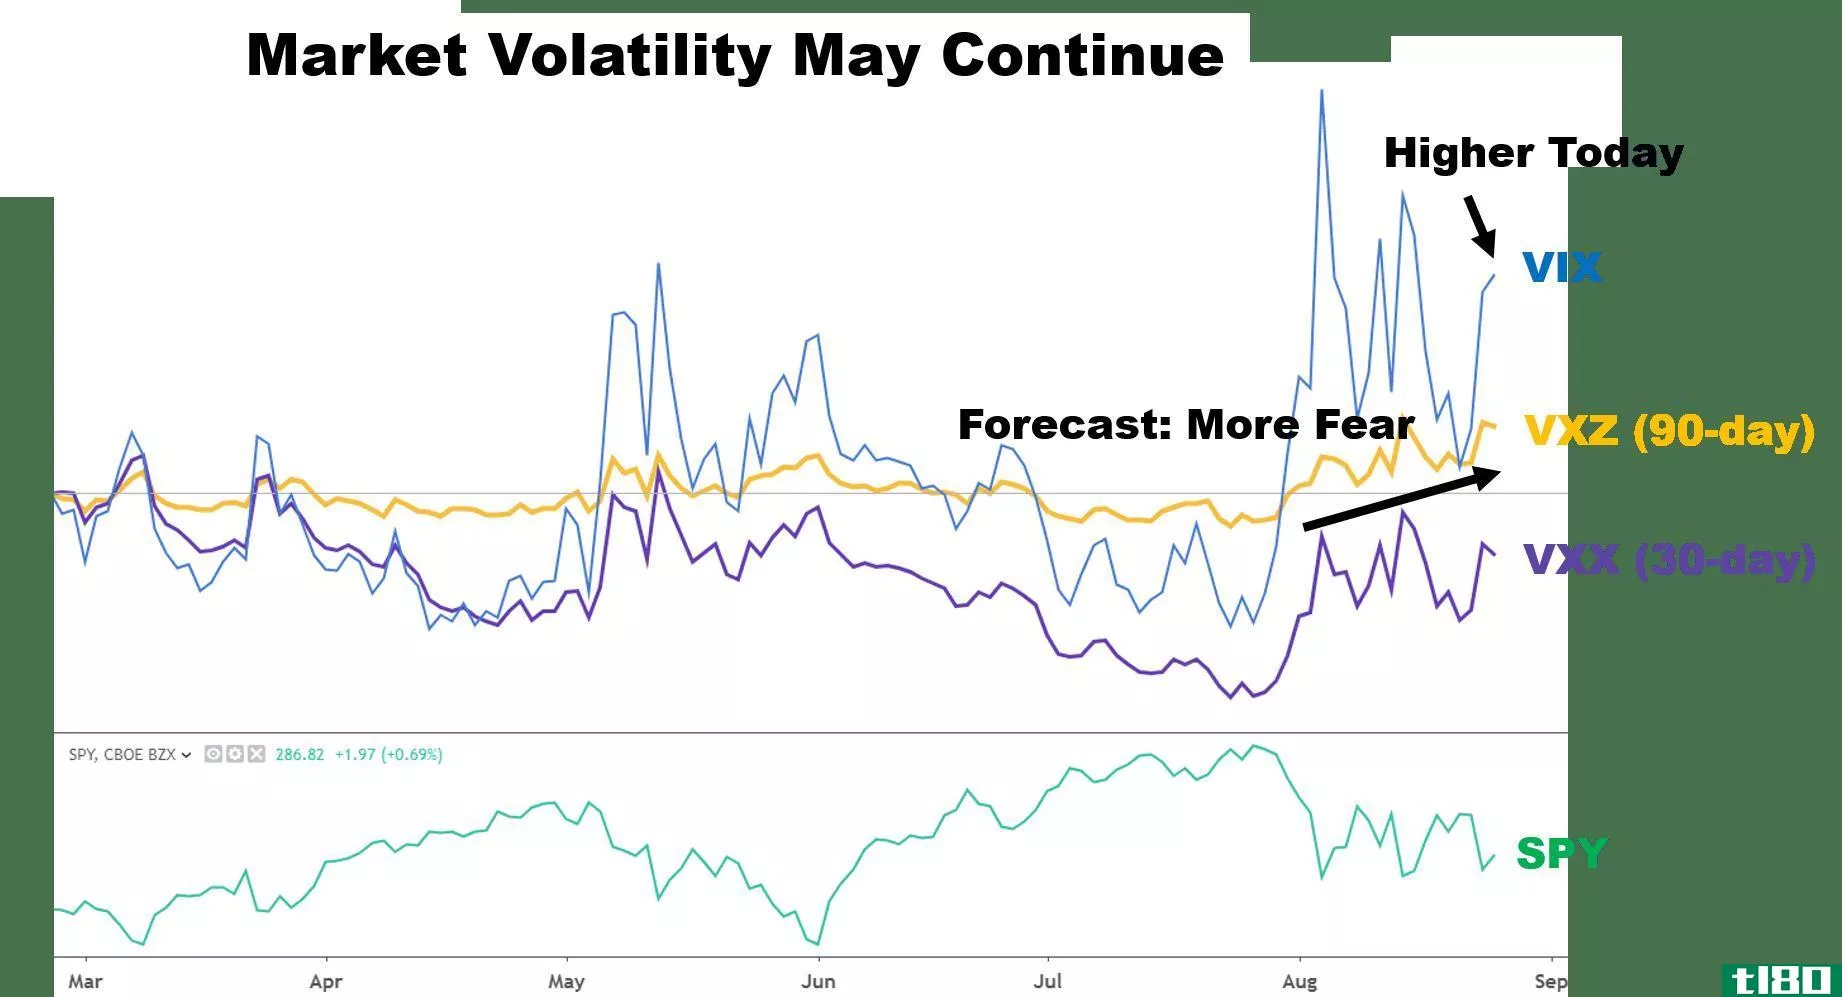 Chart showing measures of market volatility